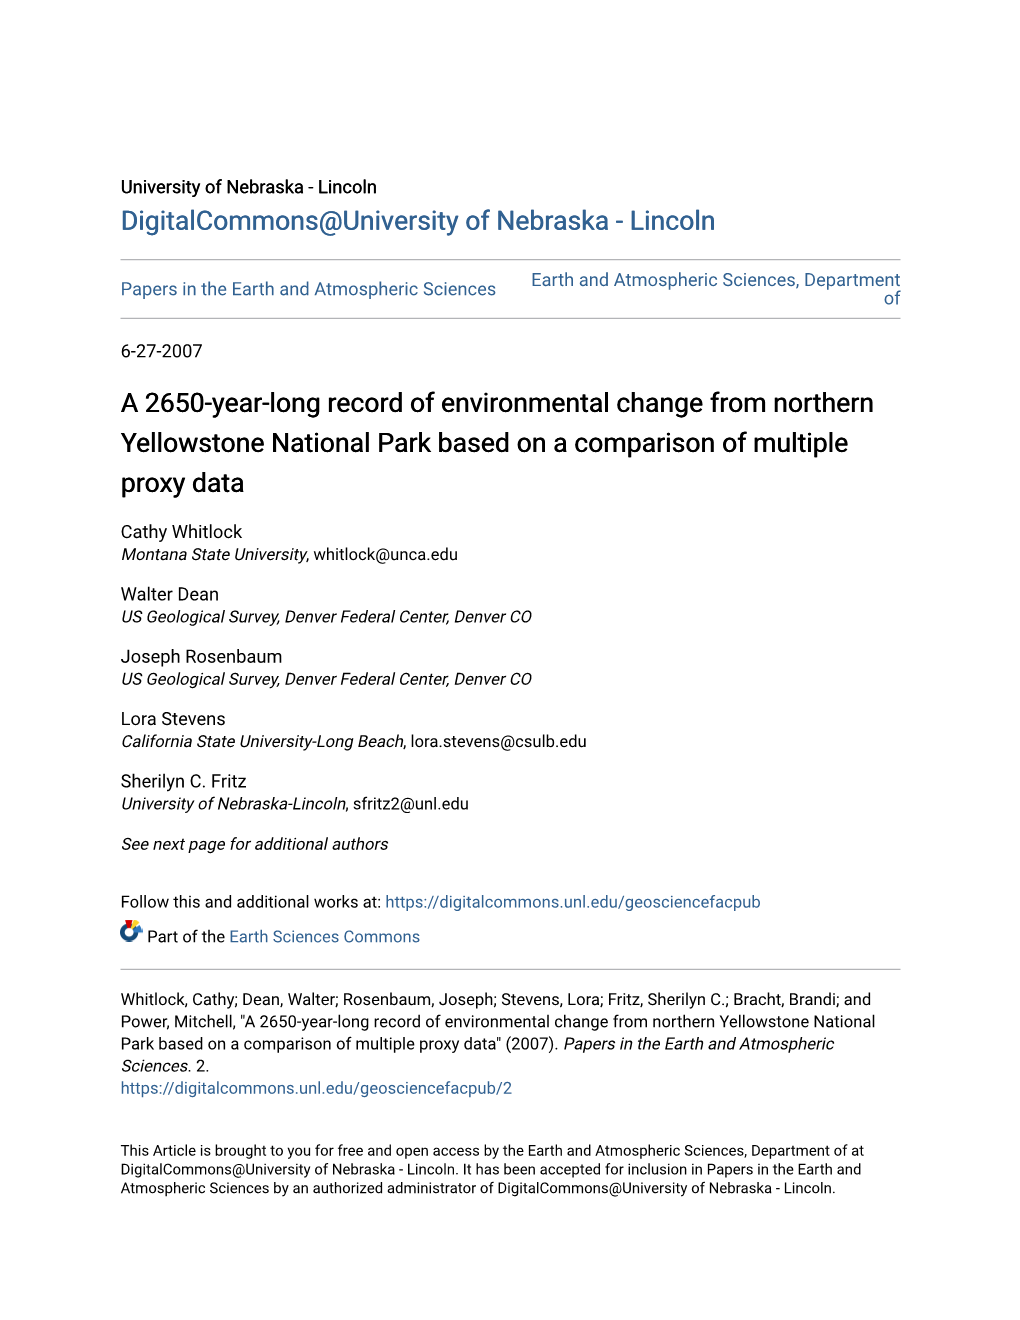 A 2650-Year-Long Record of Environmental Change from Northern Yellowstone National Park Based on a Comparison of Multiple Proxy Data